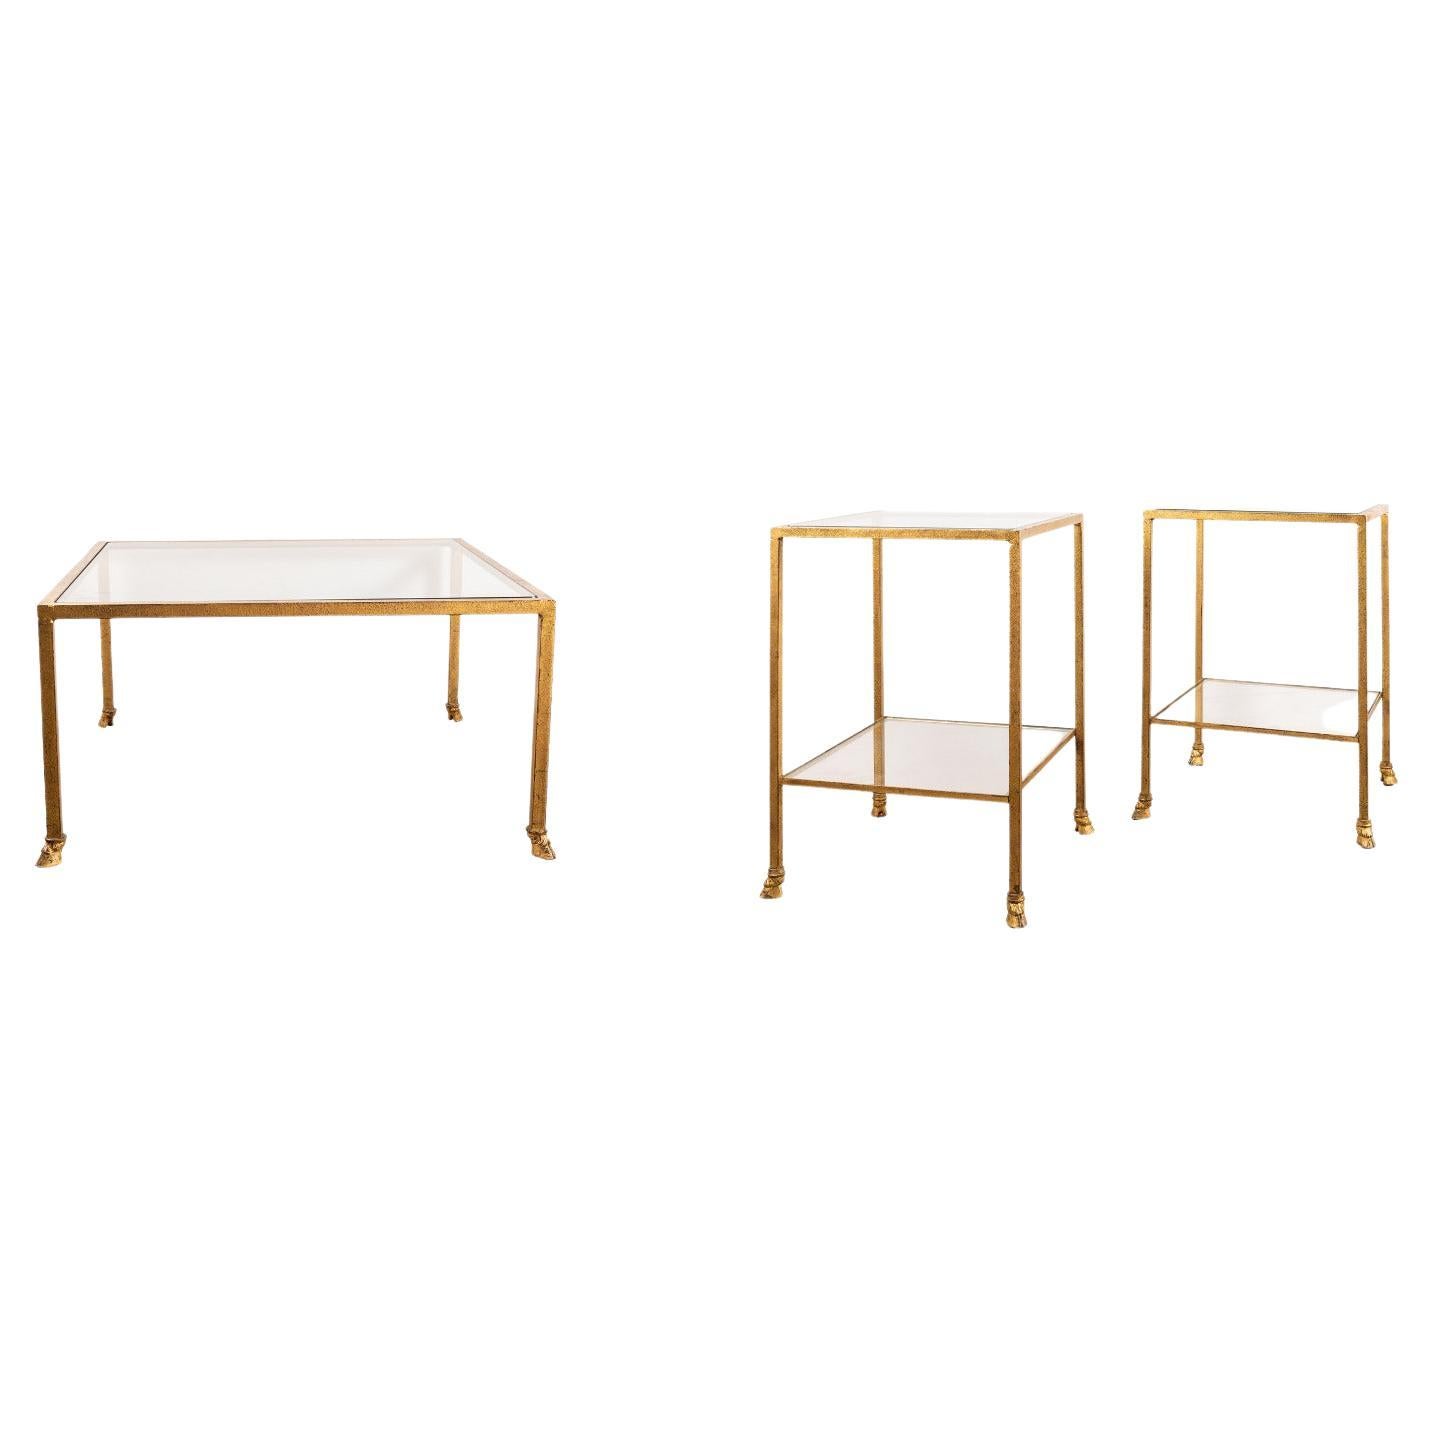 Gilt wrought iron living room set designed by Ramsay for Maison Jansen
The set is composed of a square coffee table ( dimensions: H: 37cm, 70 cm x70 cm)
and a pair of square two-tiers end tables ( dimensions: H 50 cm 35cm x 35 cm ) 

Maison